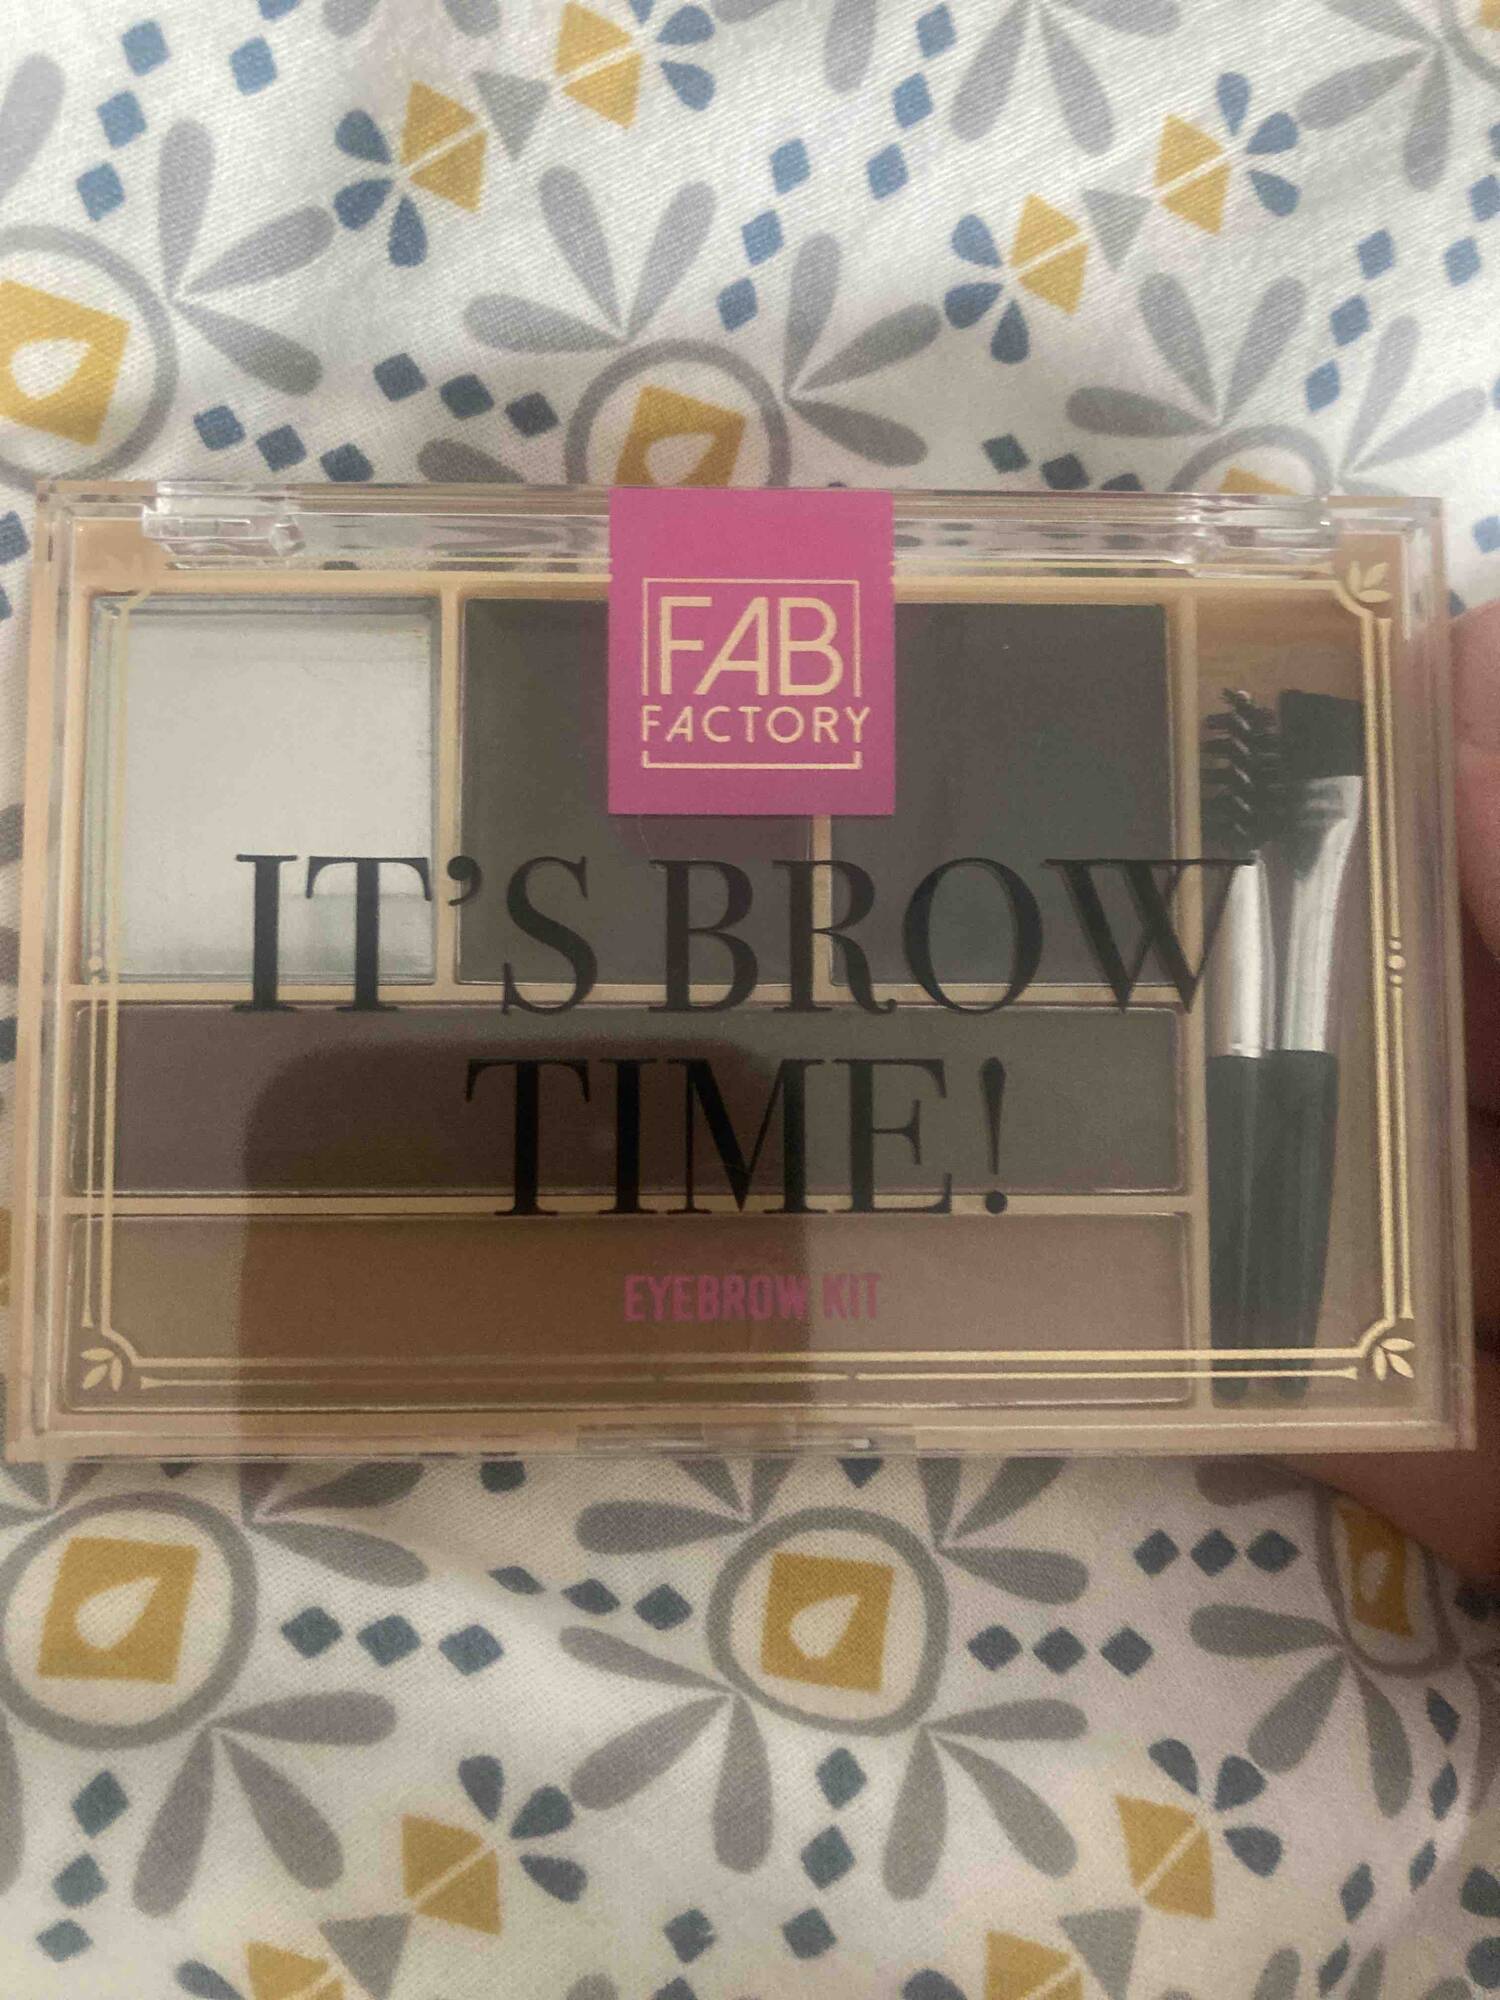 FAB FACTORY - It's brow time ! - Eyebrow kit